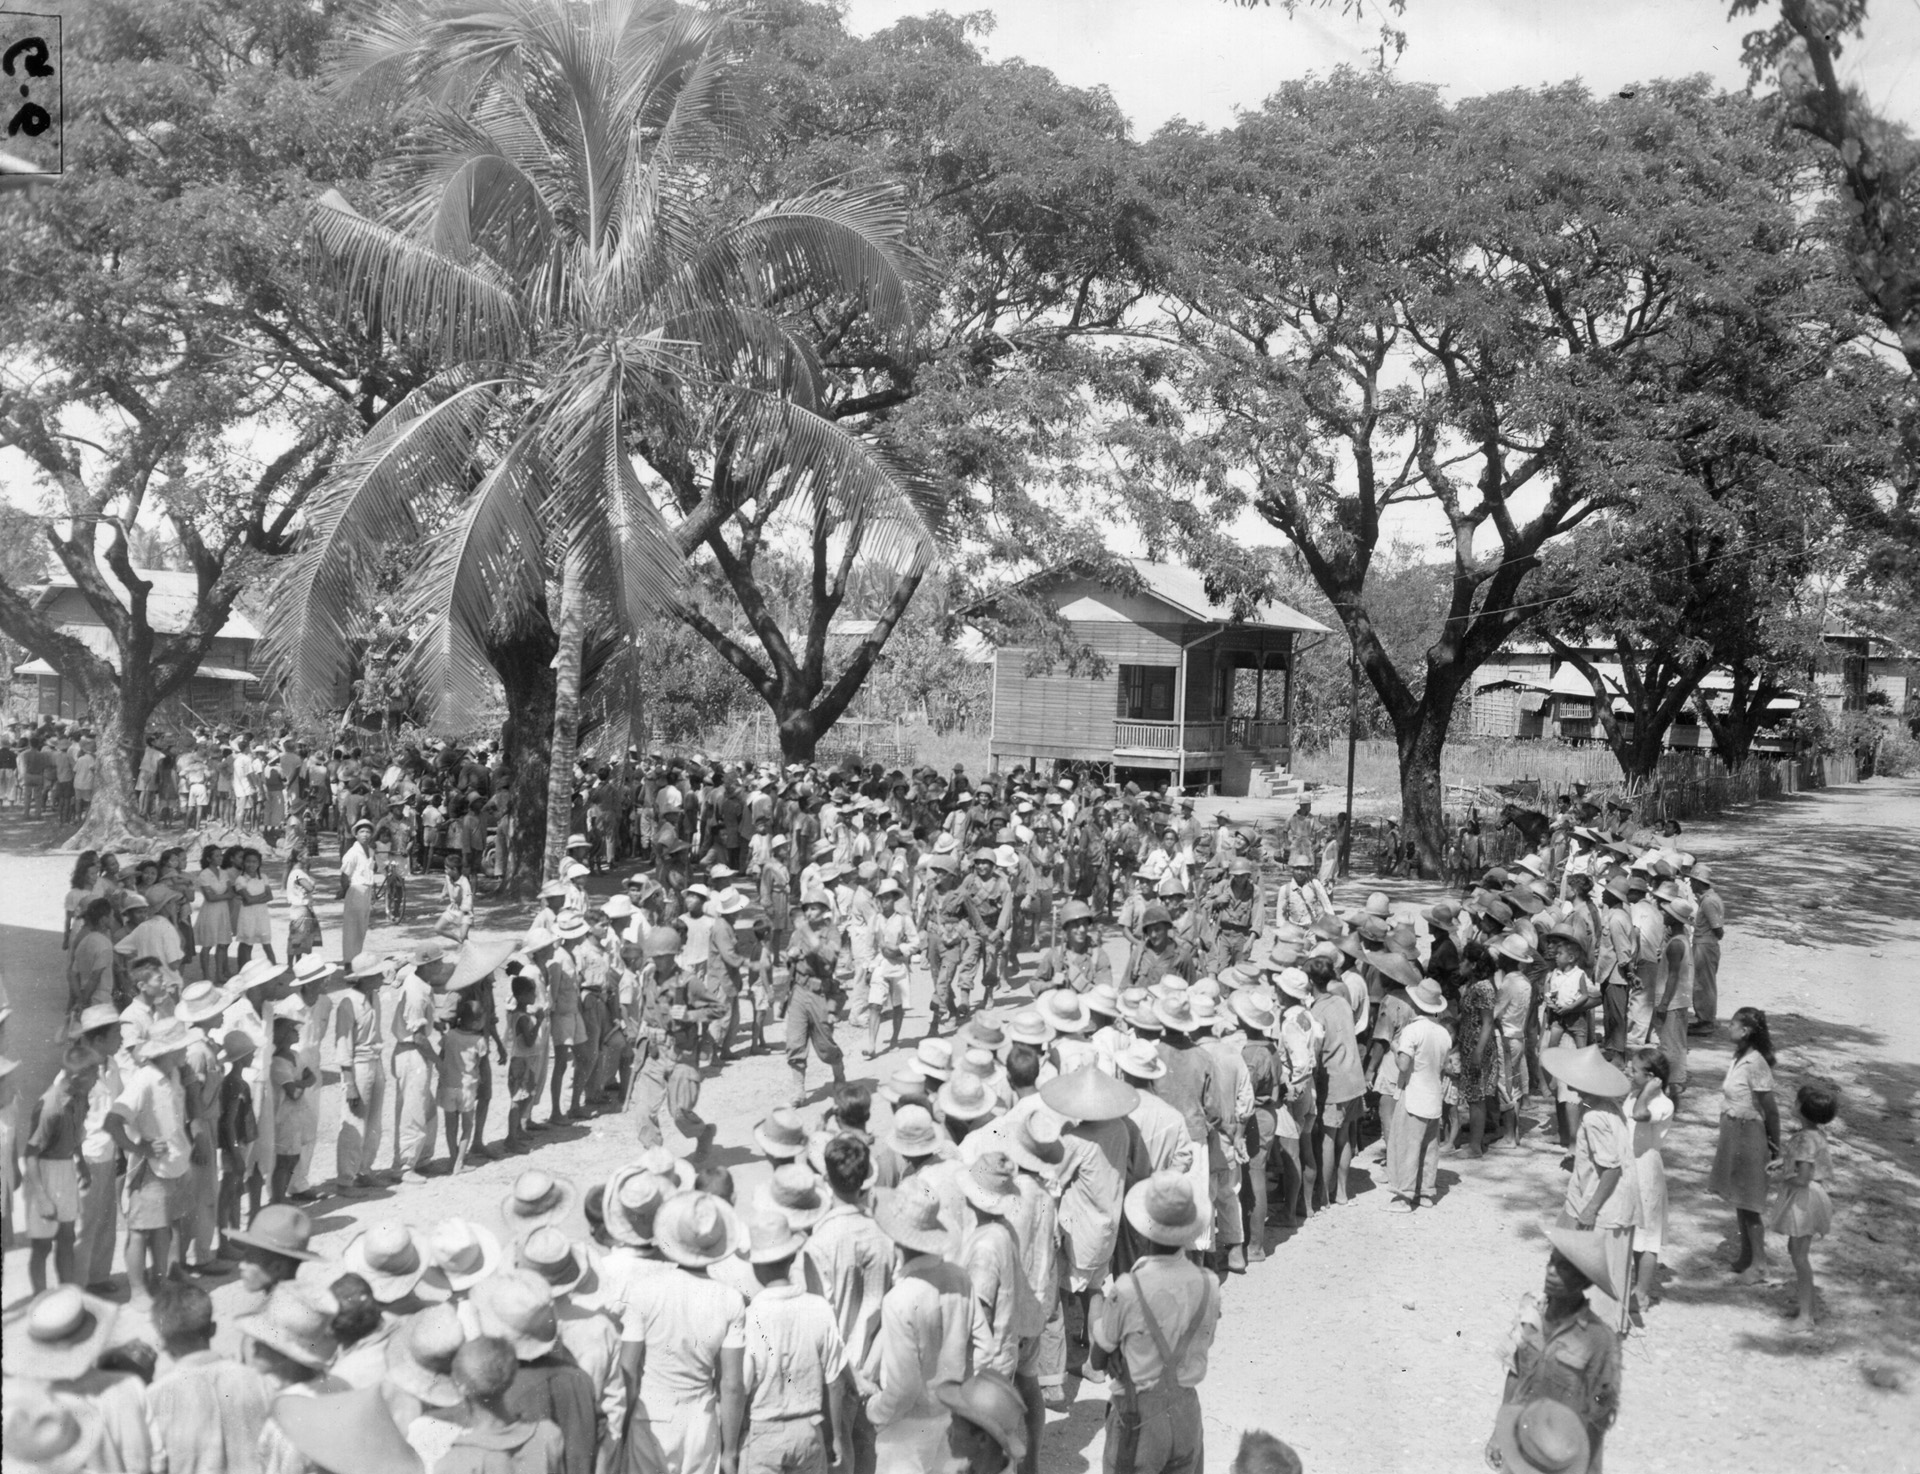 During the liberation of the Philippines on January 29, 1945, American troops are welcomed by the townspeople in the village of San Marcelino on the Bataan Peninsula. The land campaign to wrest the Philippines from Japanese control began in the autumn of 1944.